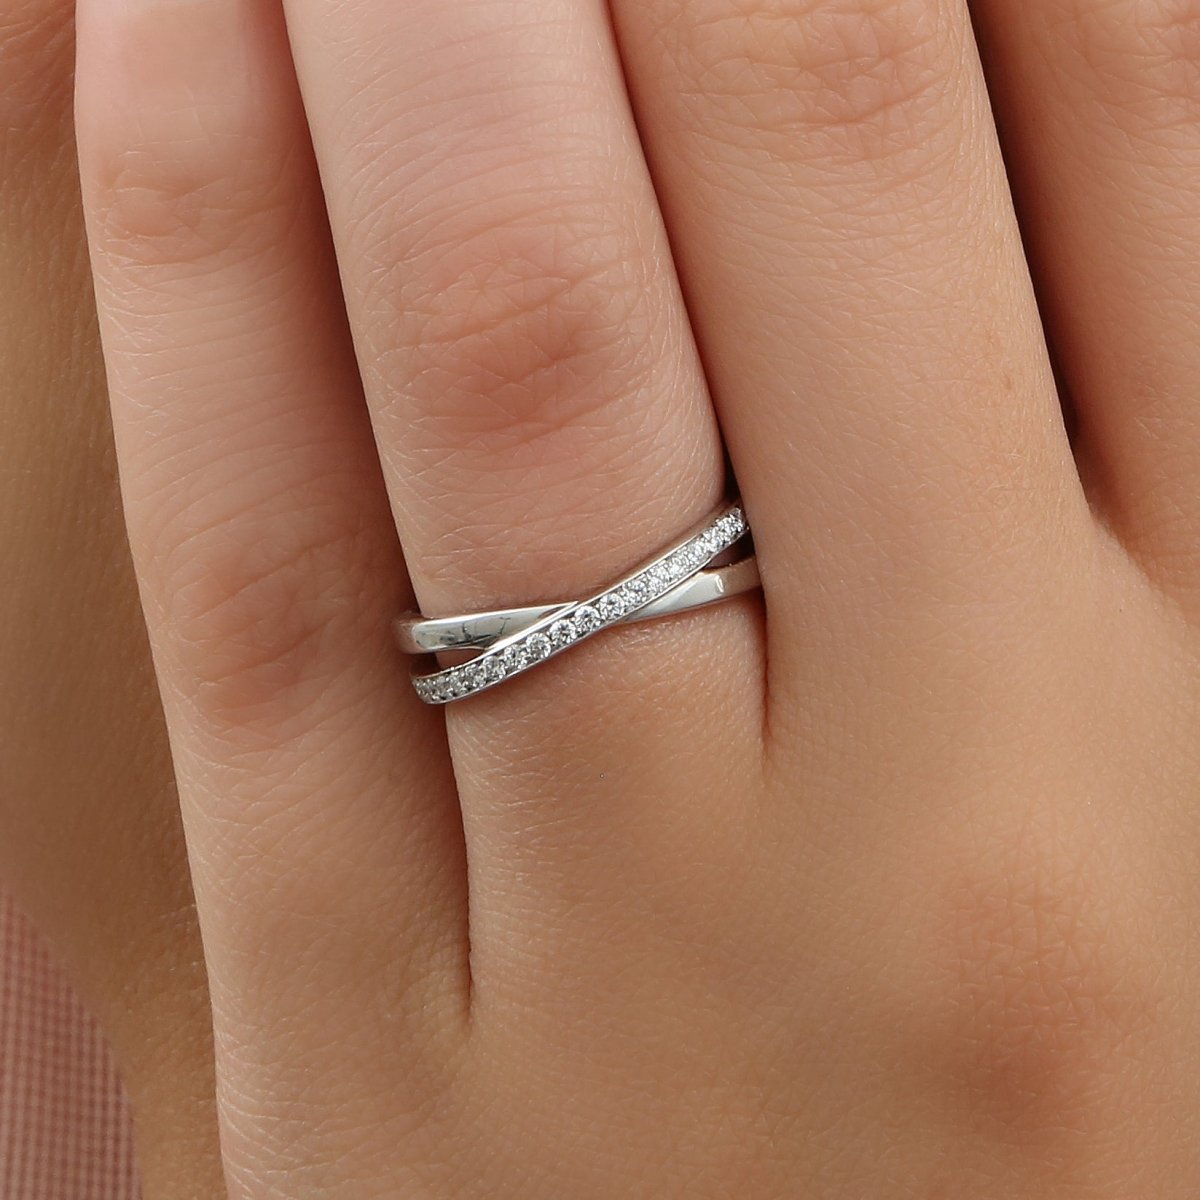 CROSS-OVER WEDDING BAND IN WHITE GOLD WITH DIAMONDS - ANNIVERSARY & CELEBRATION RINGS